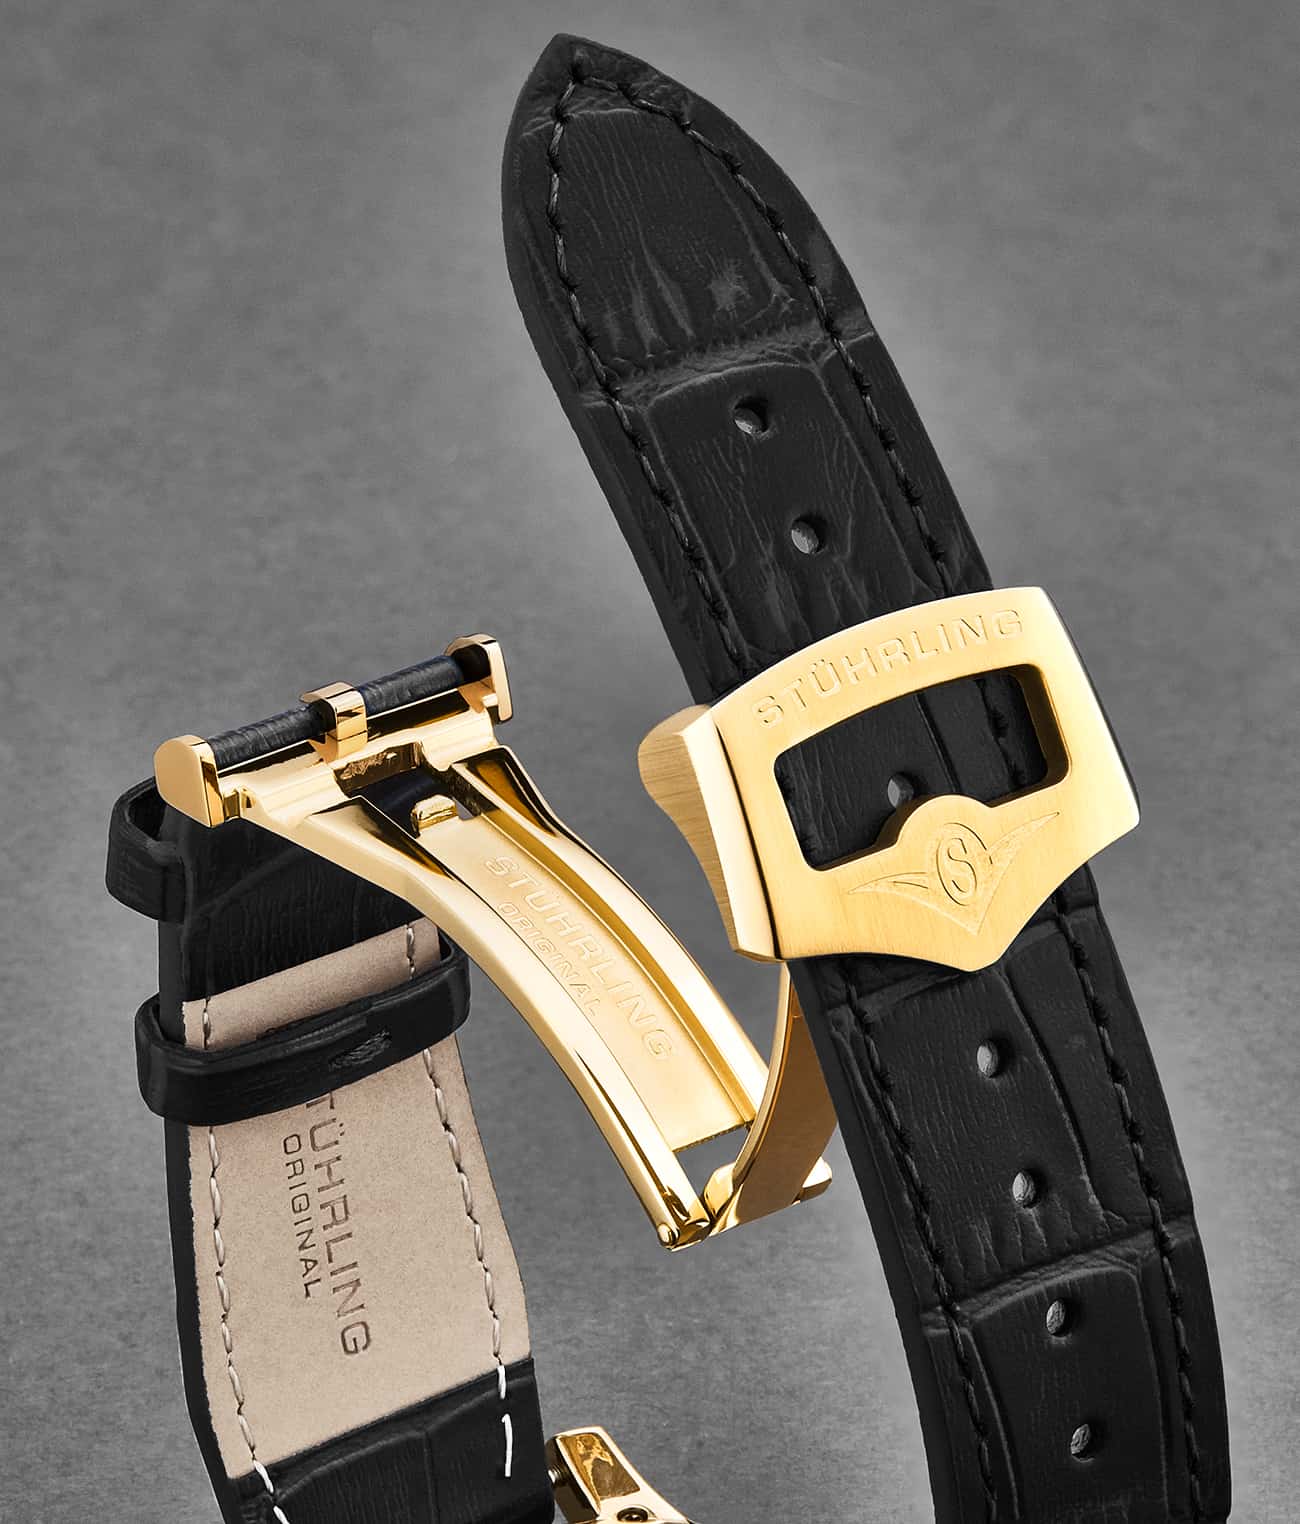 24mm Black Leather Watch Strap with Rose Gold-Tone Buckle – Quick Release, In stock!